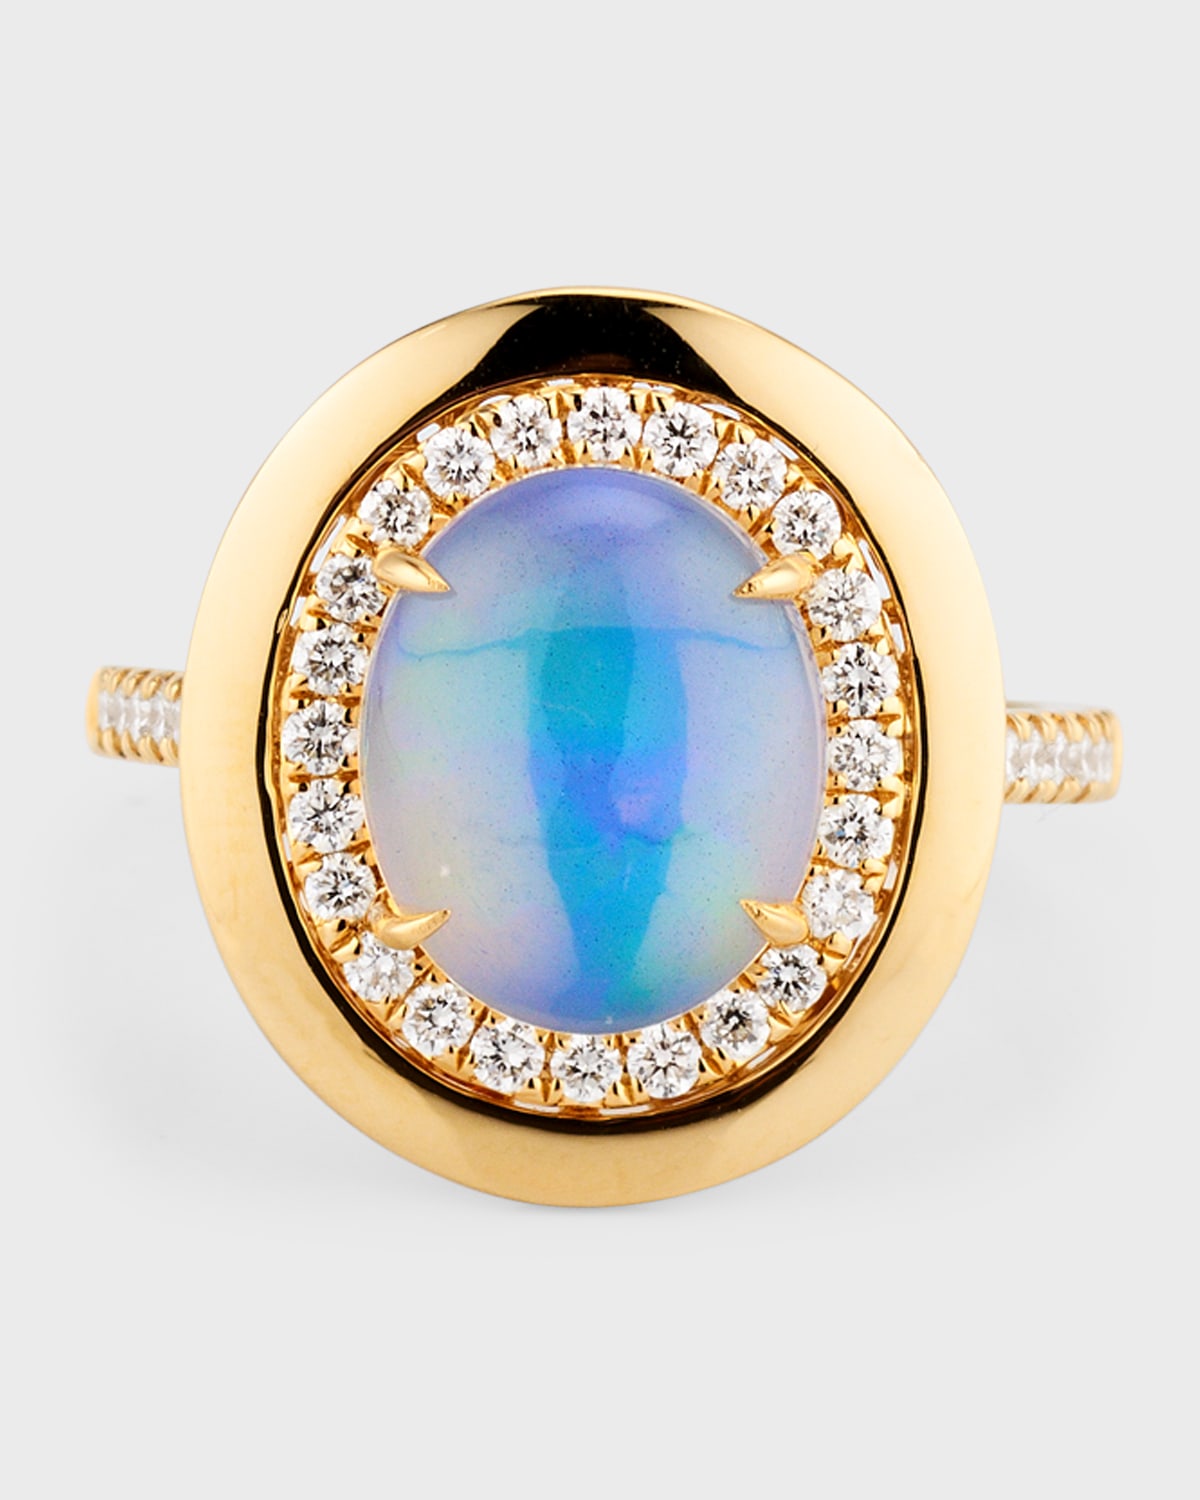 18K Yellow Gold Ring with Oval Opal and Diamonds, Size 7, 2.22tcw